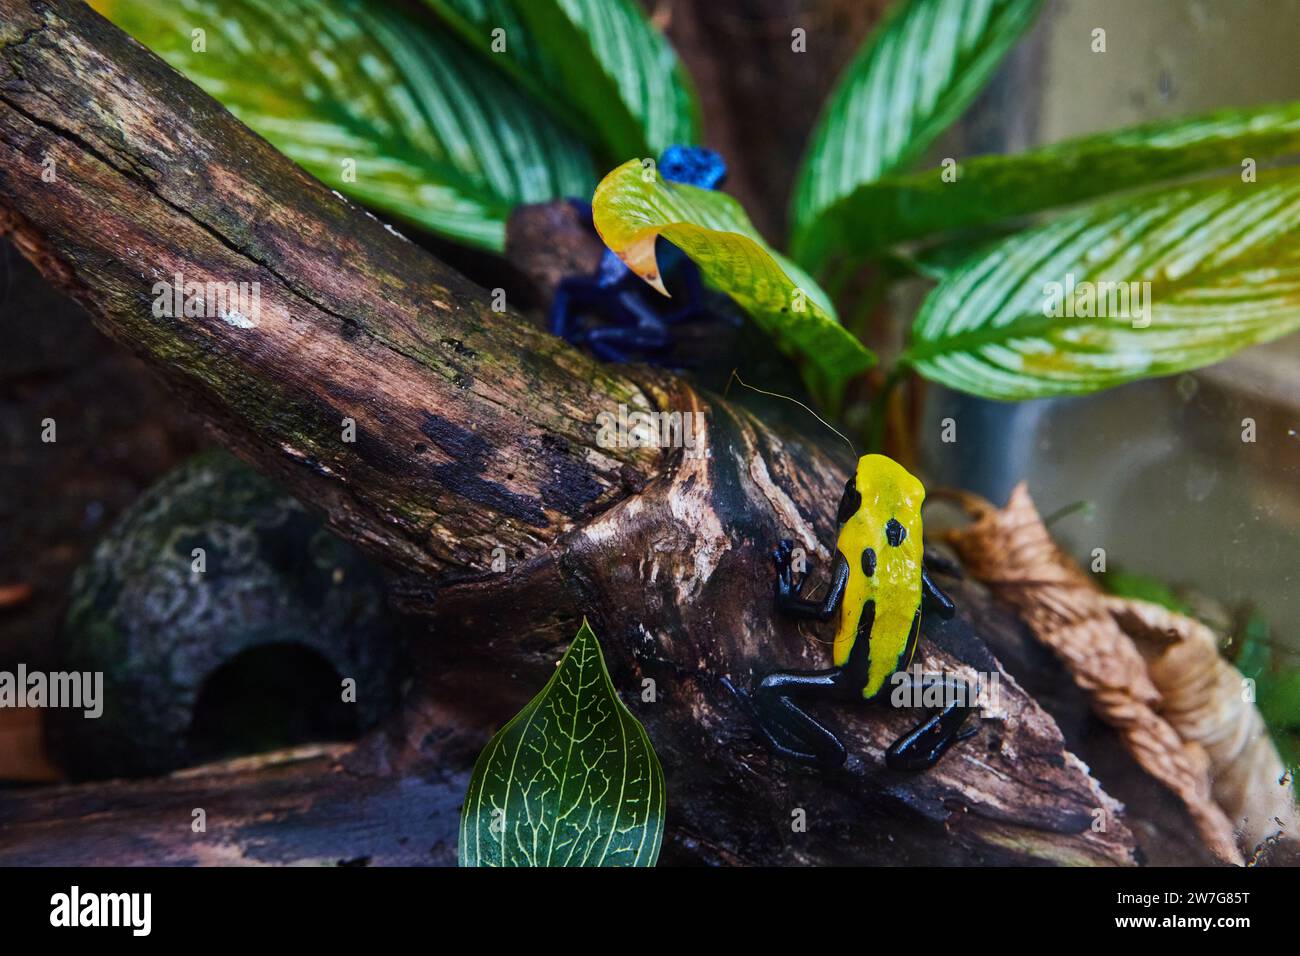 Vibrant Yellow and Blue Frogs in Tropical Habitat Stock Photo